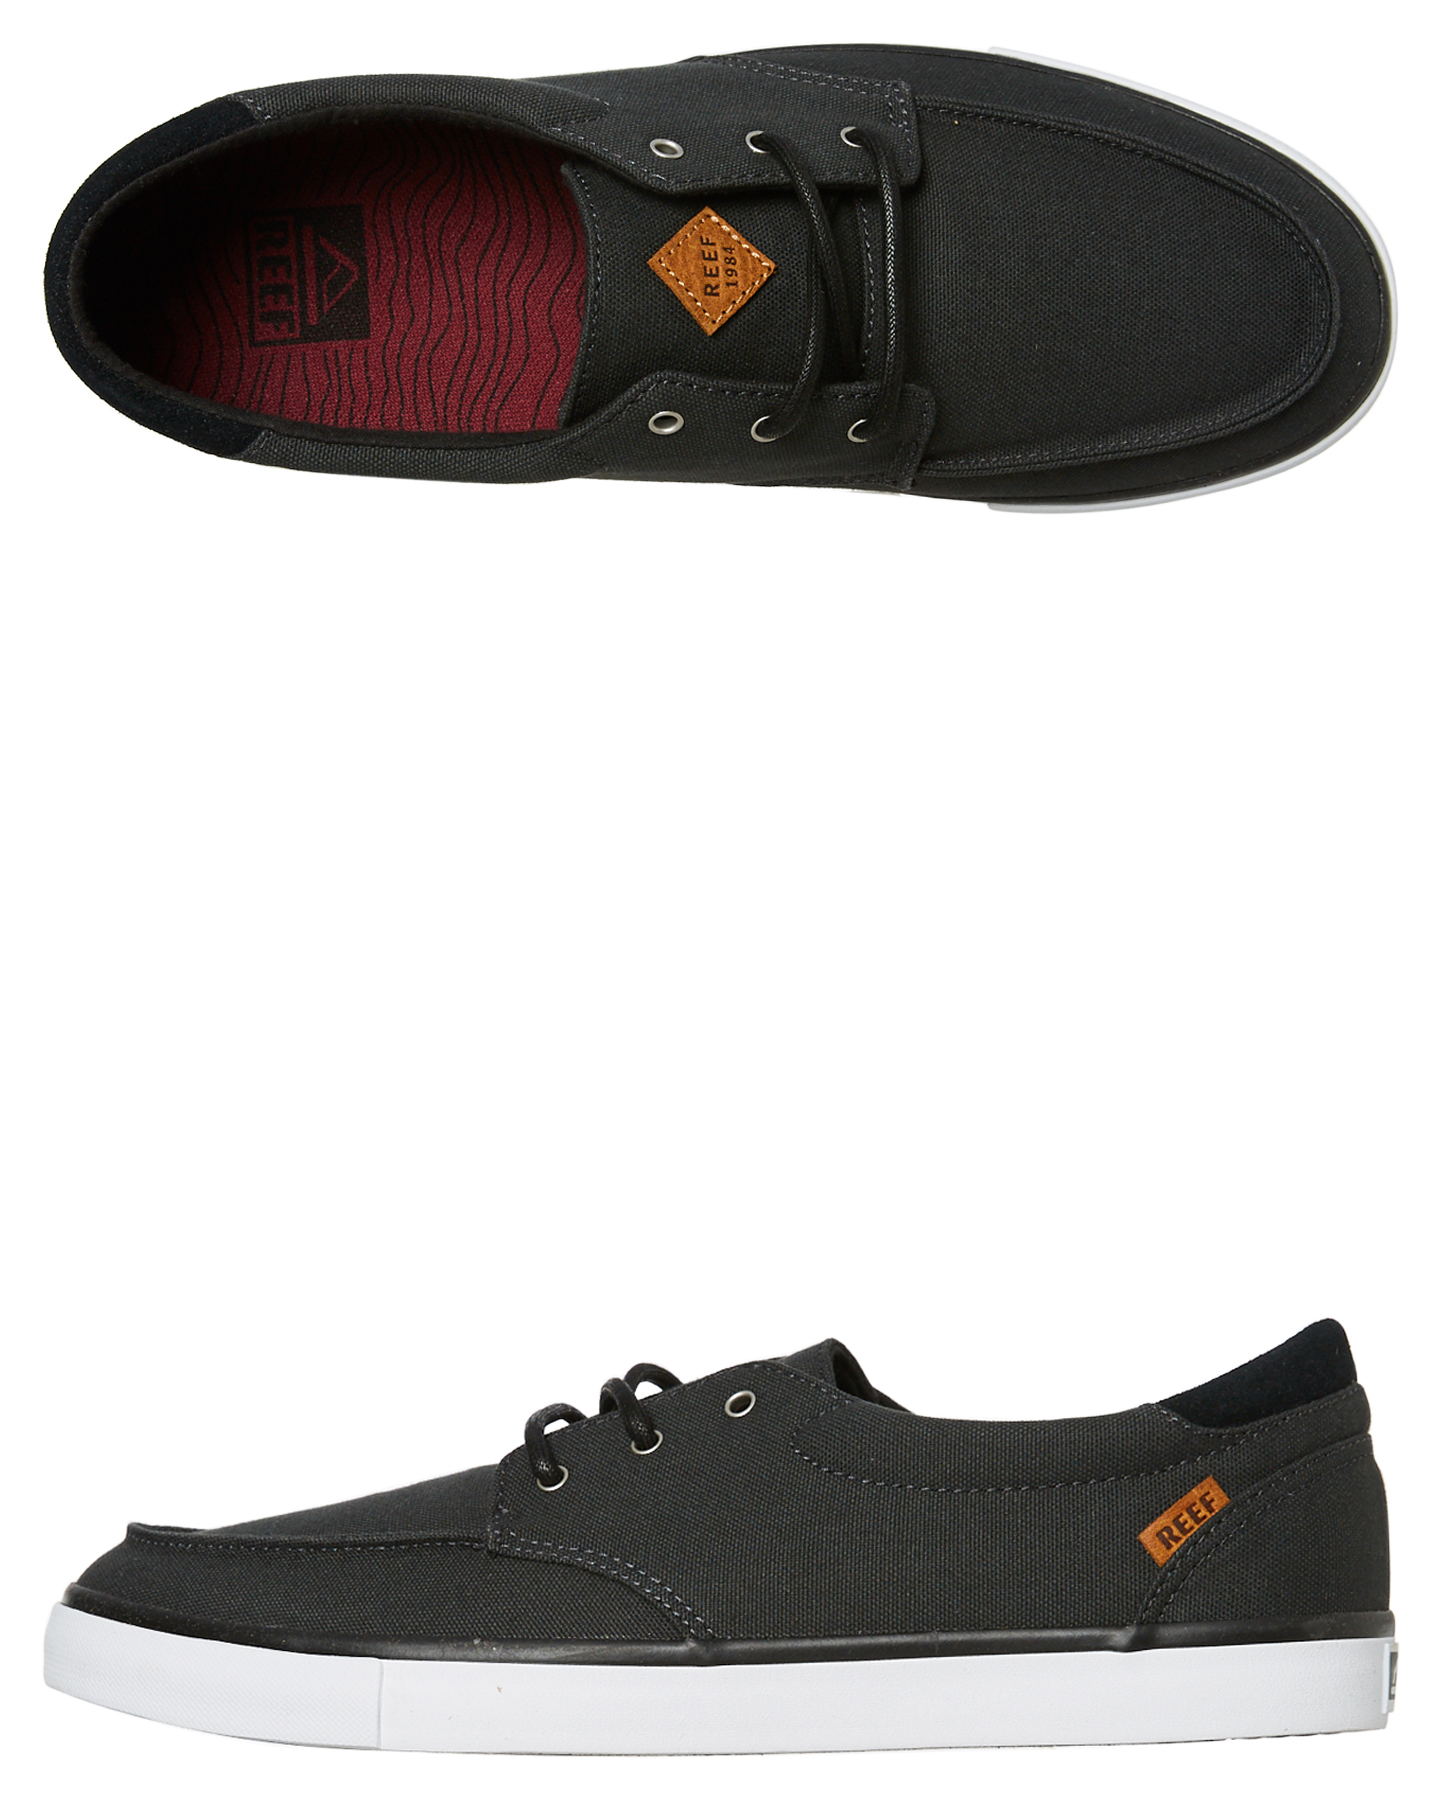 reef shoes mens